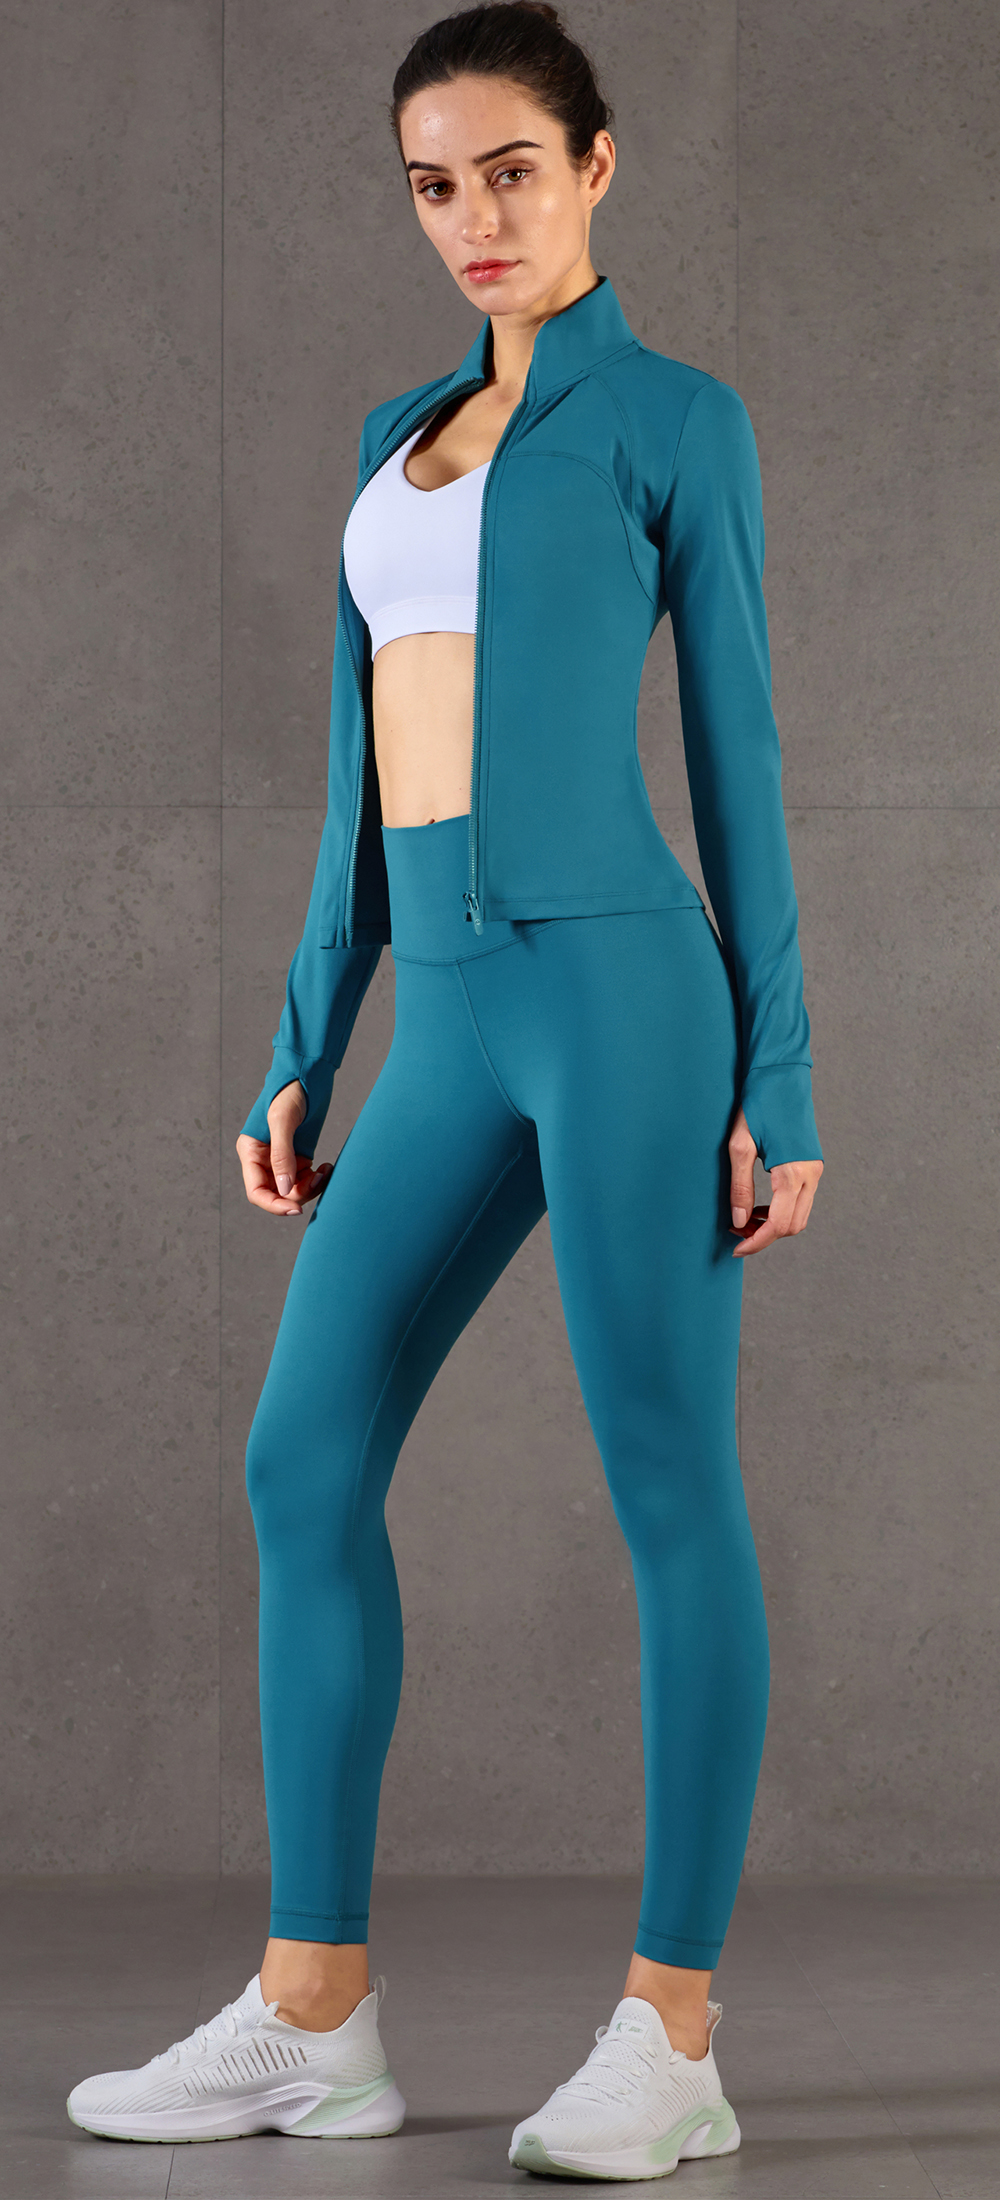 Hergymclothing ladies athletic jackets blue and comfortable workout pants blue